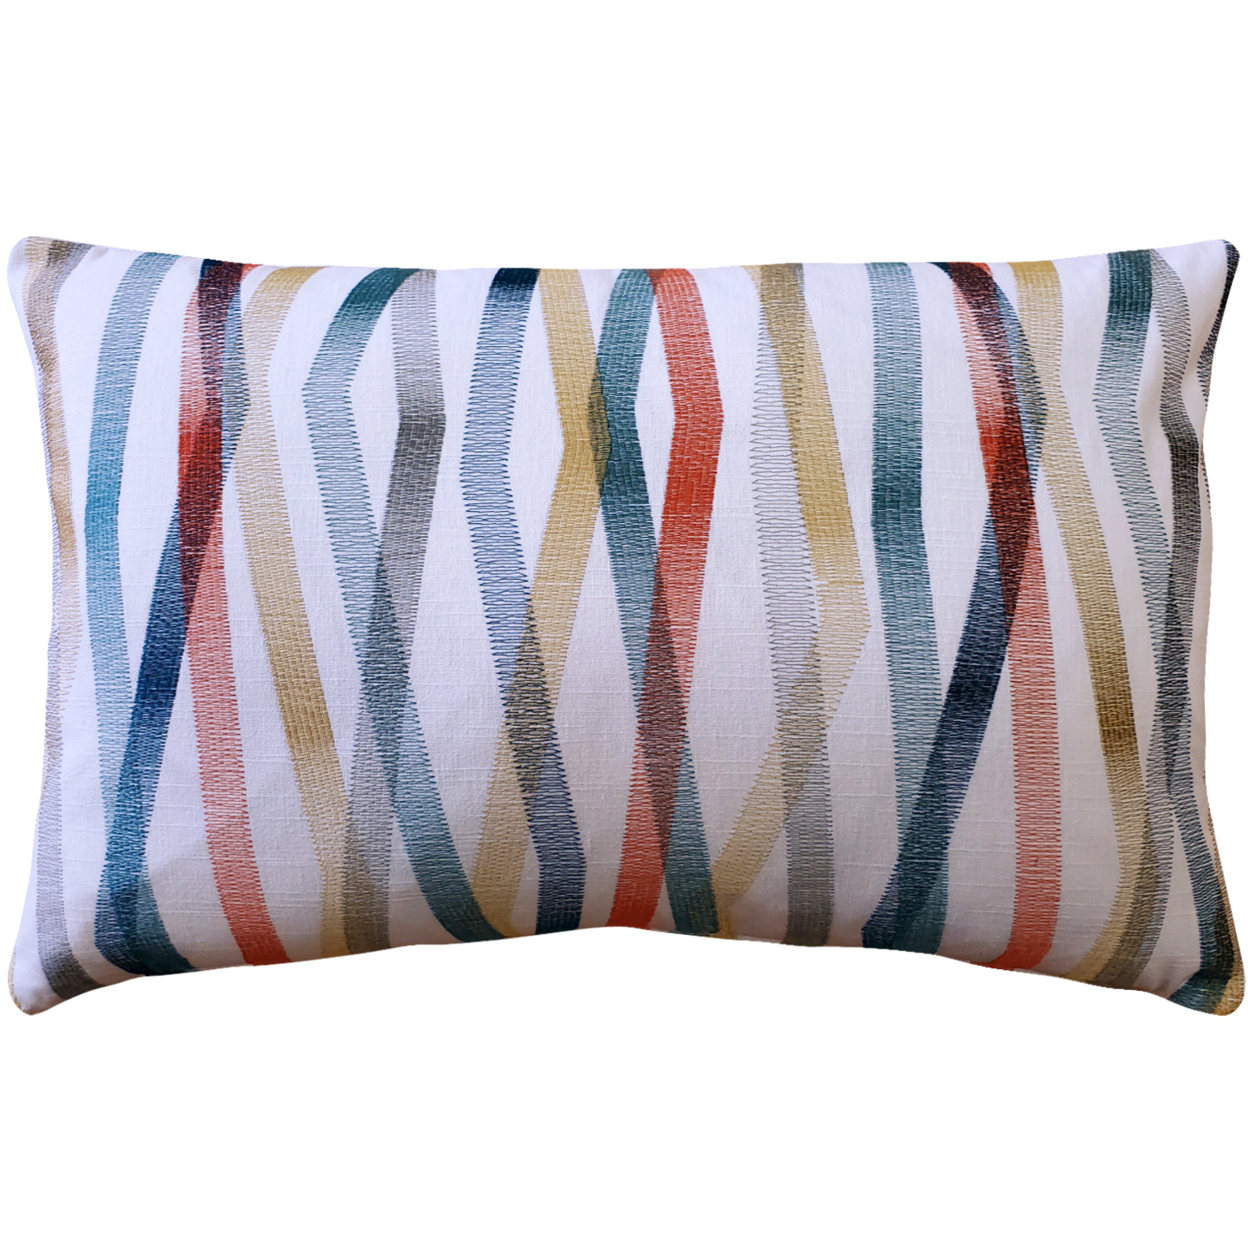 Wandering Lines Ocean Coast Throw Pillow 14x24 Inches Square, Complete Pillow With Polyfill Pillow Insert